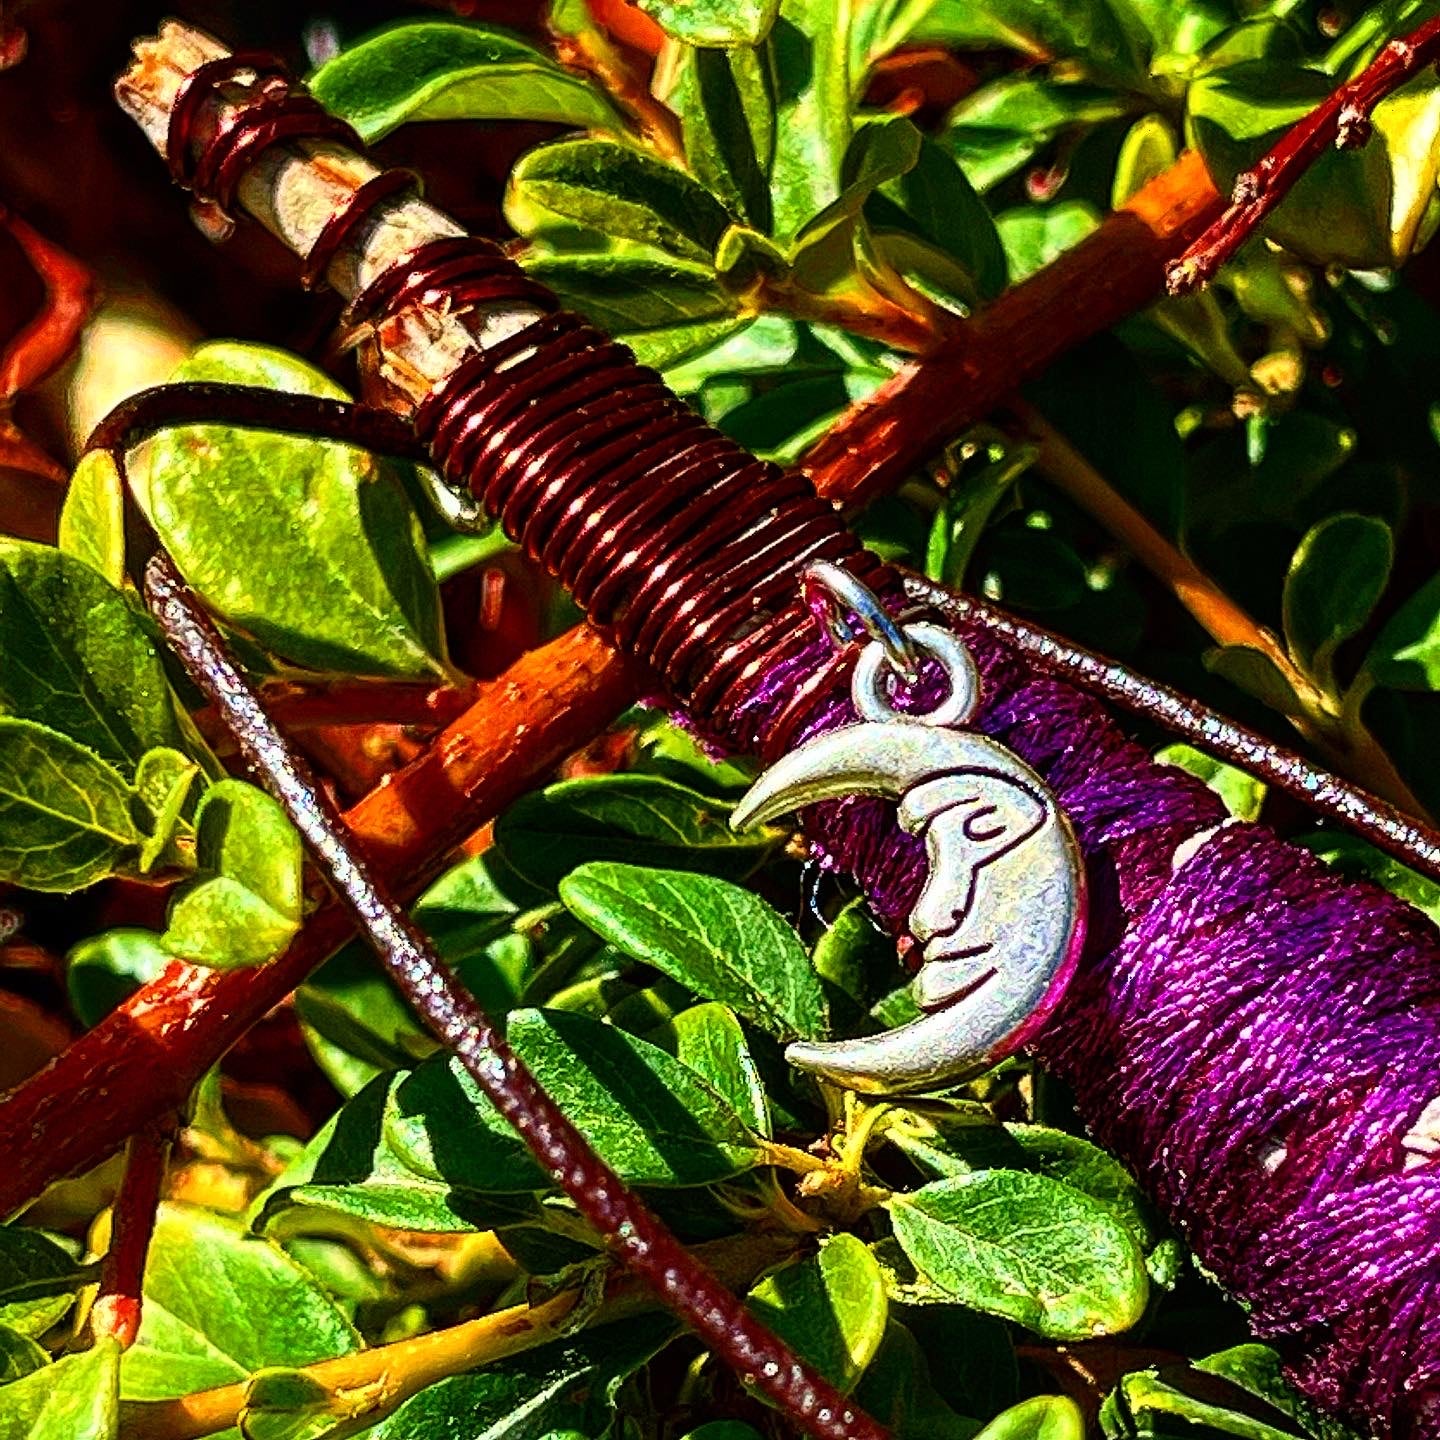 Wise Crescent sage necklace pendant, this is a photo of Sage jewelry made by Paul Adrian Moon, this specific piece has a Half Face Crescent Moon Pendant, Paul Adrian Moon is also a photographer in Southern California and graphic artist wrapping Sage necklaces for portable smudging and wear. Sage accessories, wire wrapping Sage and crystals. Burnable Sage. Handmade and natural